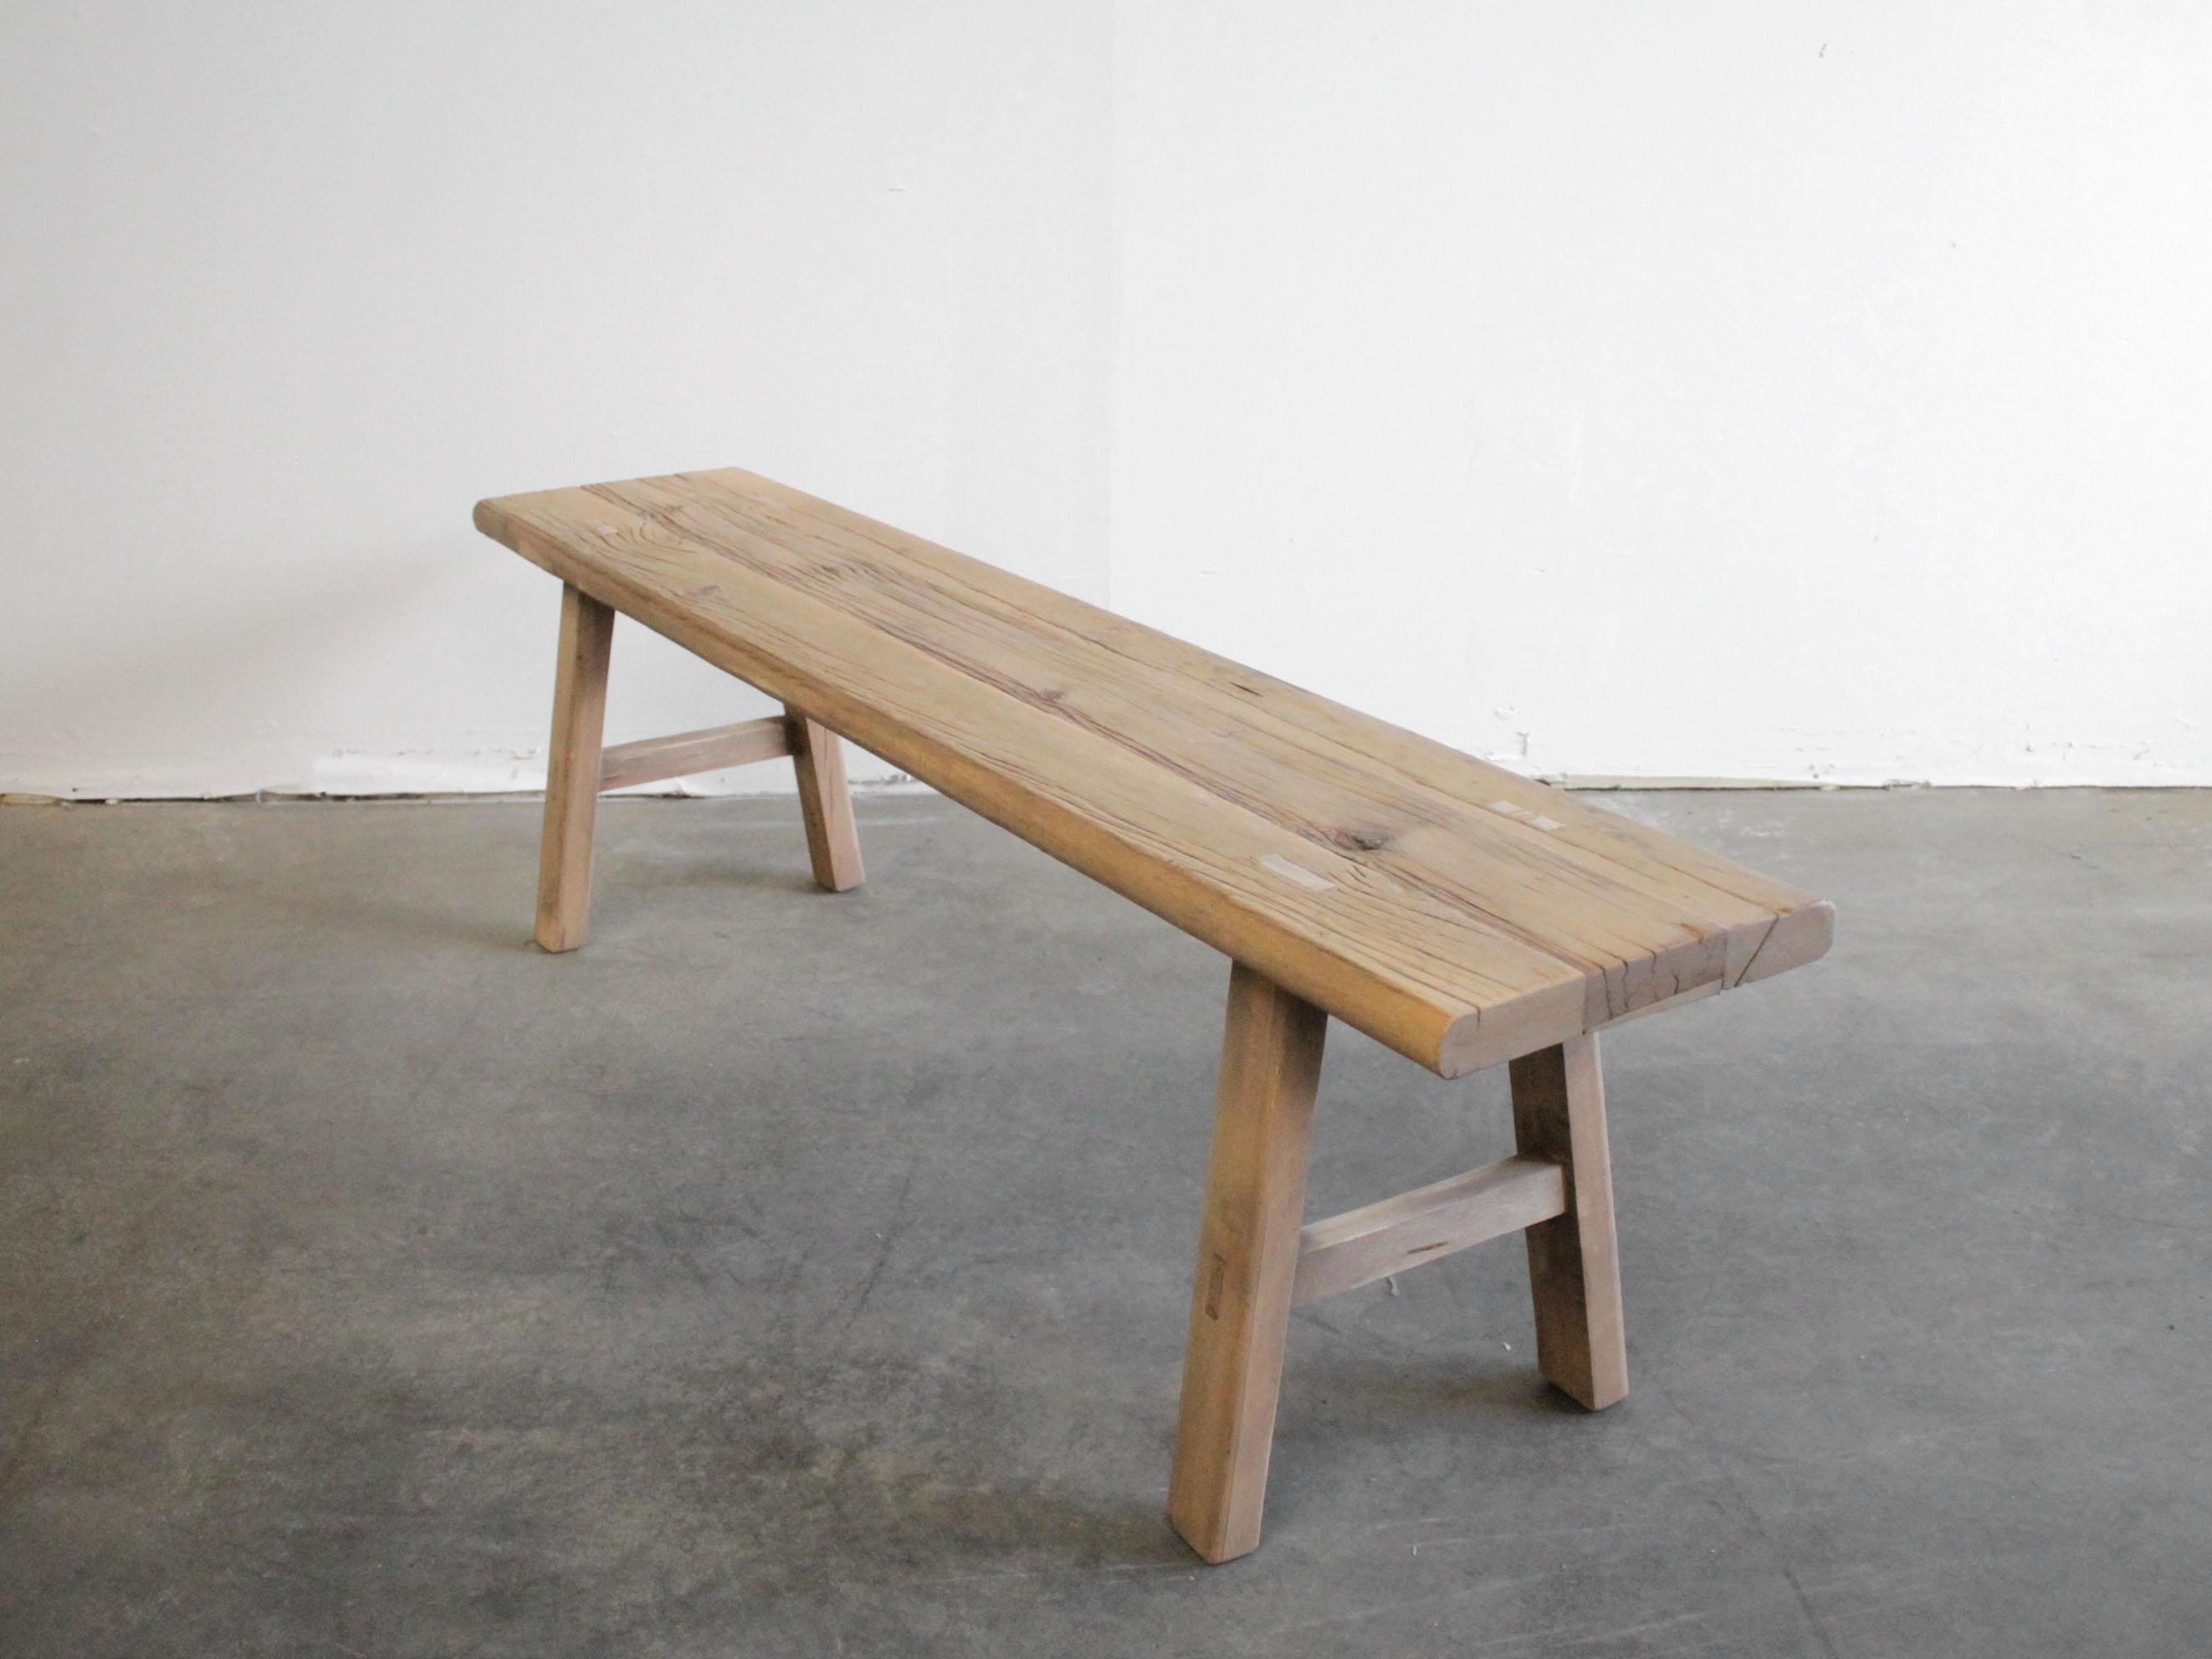 Reclaimed vintage elm wood bench
Vintage reclaimed elm wood benches! Beautiful antique patina, with weathering and age, these are solid and sturdy ready for daily use, use as as a table behind a sofa, stool, coffee table, they are great for any